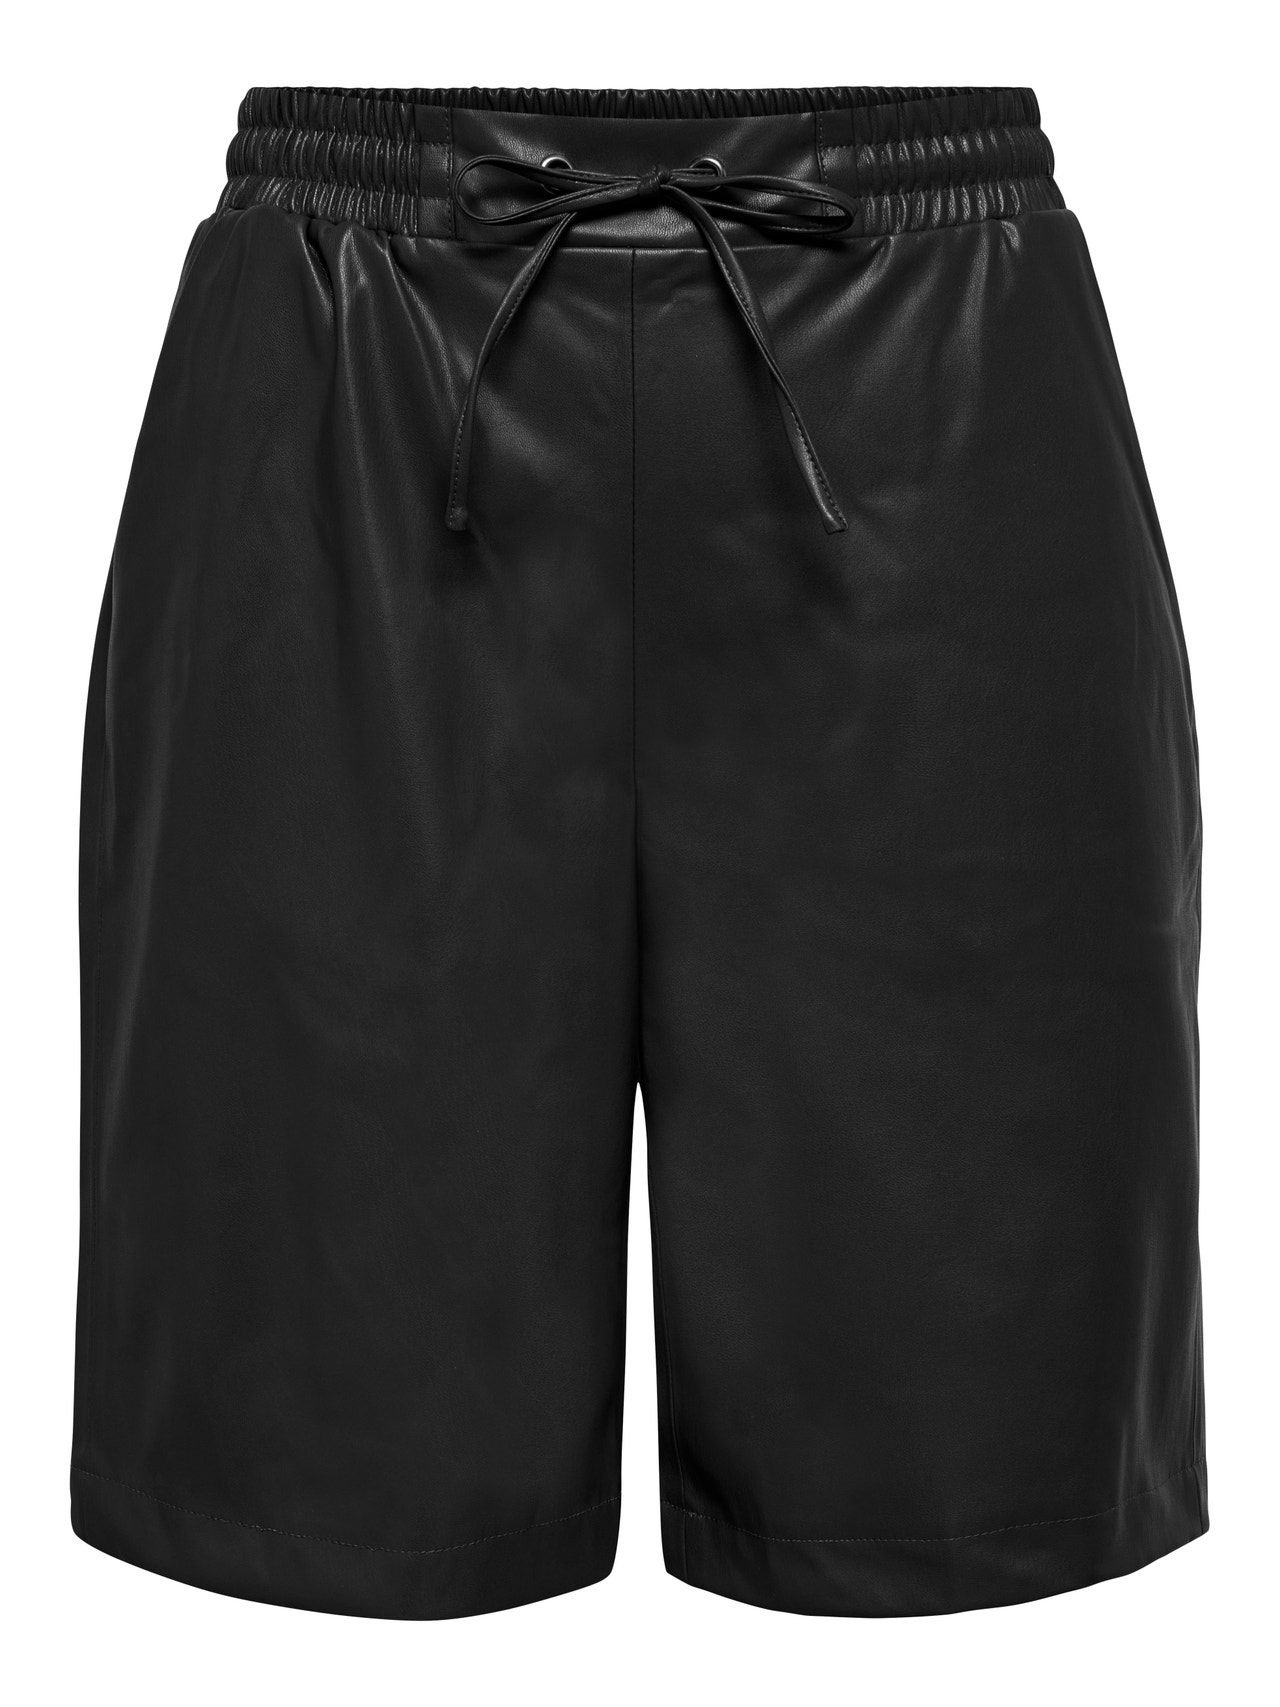 Sterling & Stitch Faux Leather Flame Short - Women's Shorts in Black